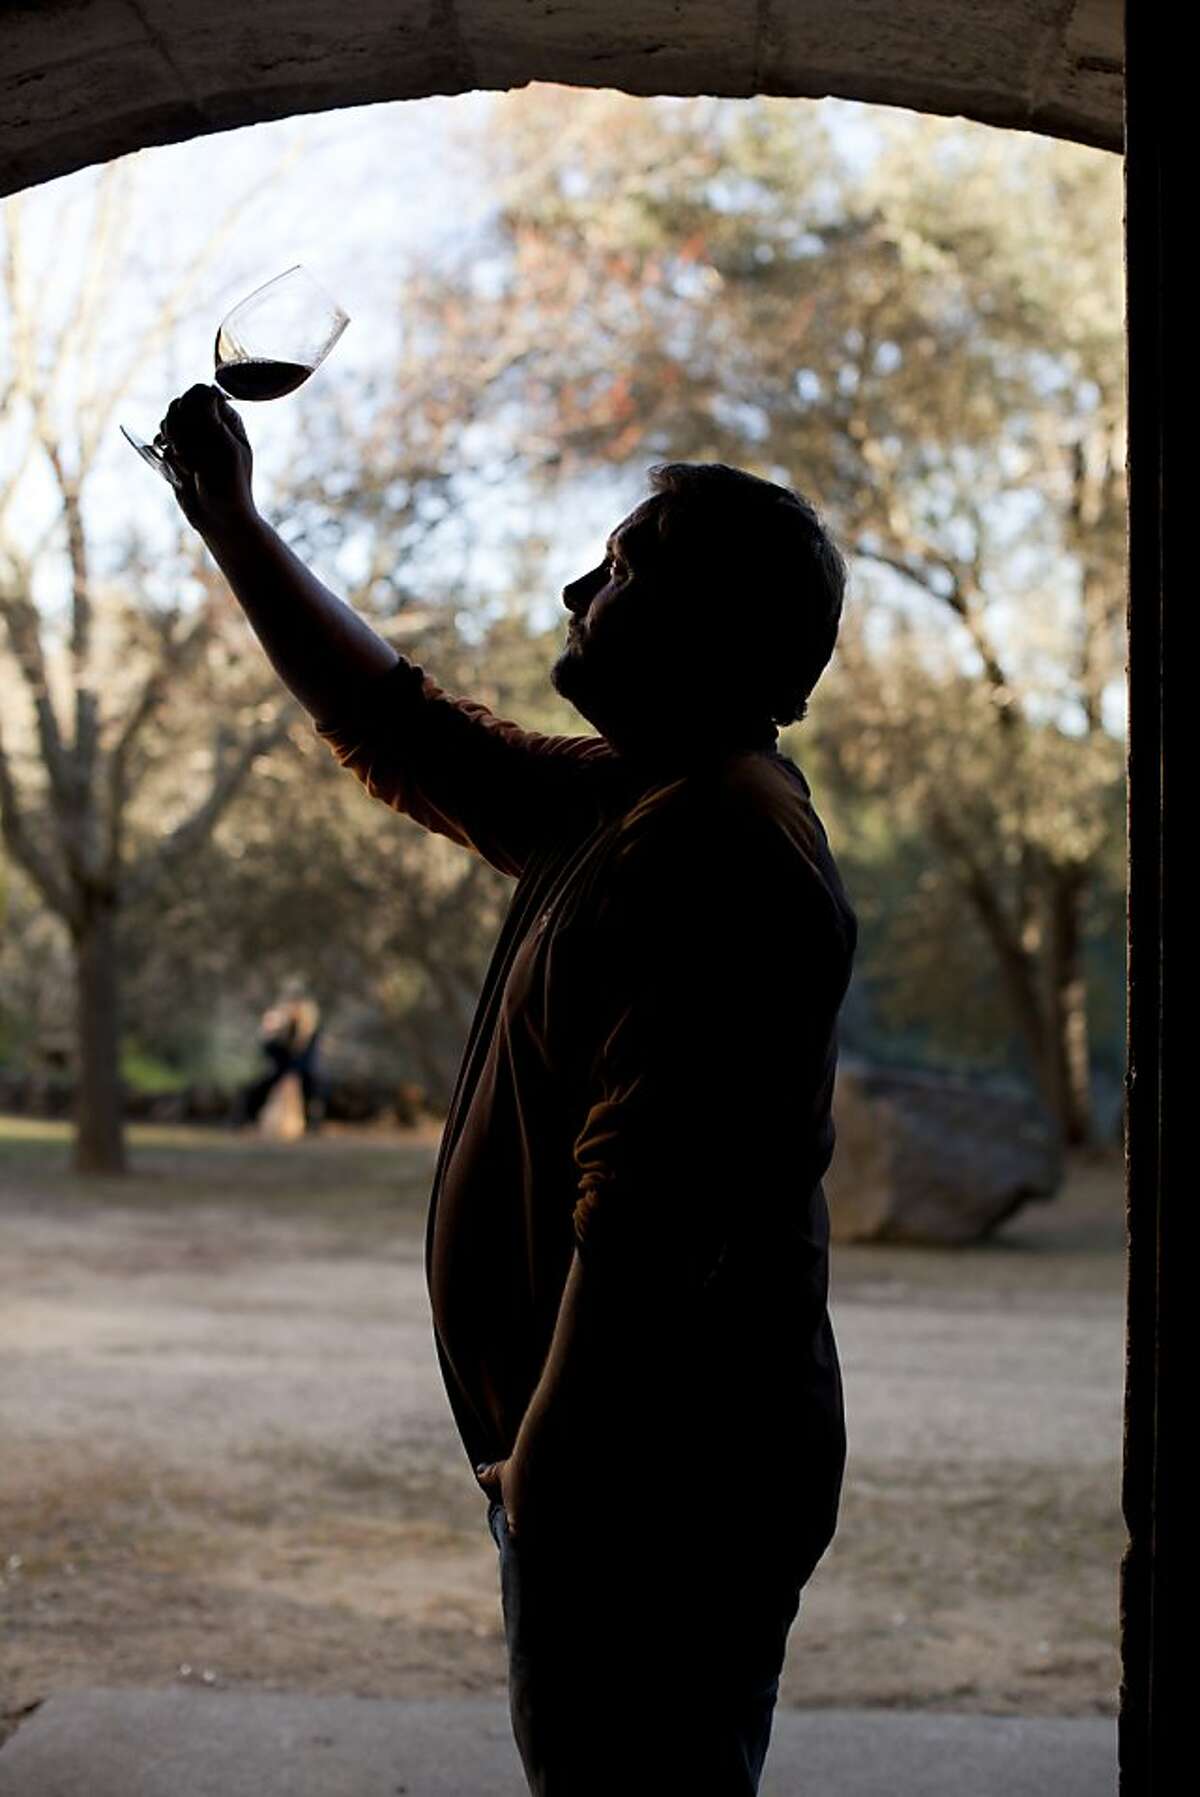 Chris Travers, part owner of Mayacamas Vineyards, built in 1889 by John Henry Fisher, inspects a 1991 cabernet sauvignon on Mount Veeder, Calif., Friday, March 8, 2013.